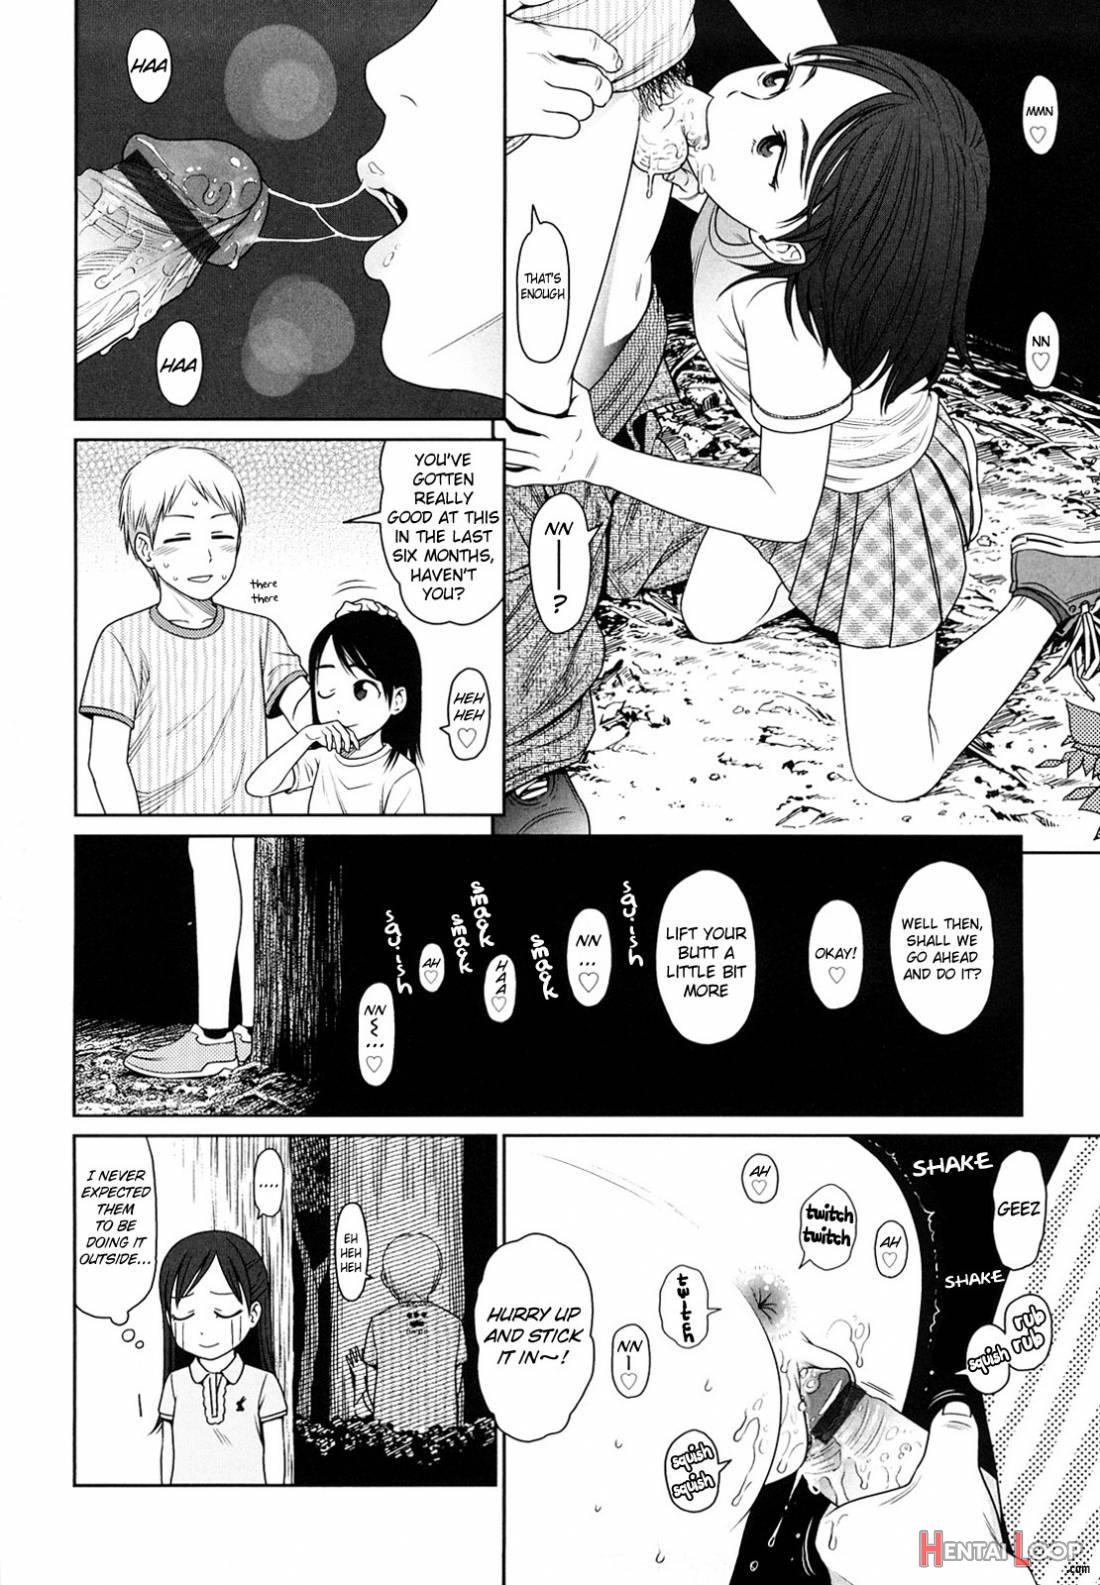 Japanese Preteen Suite page 190